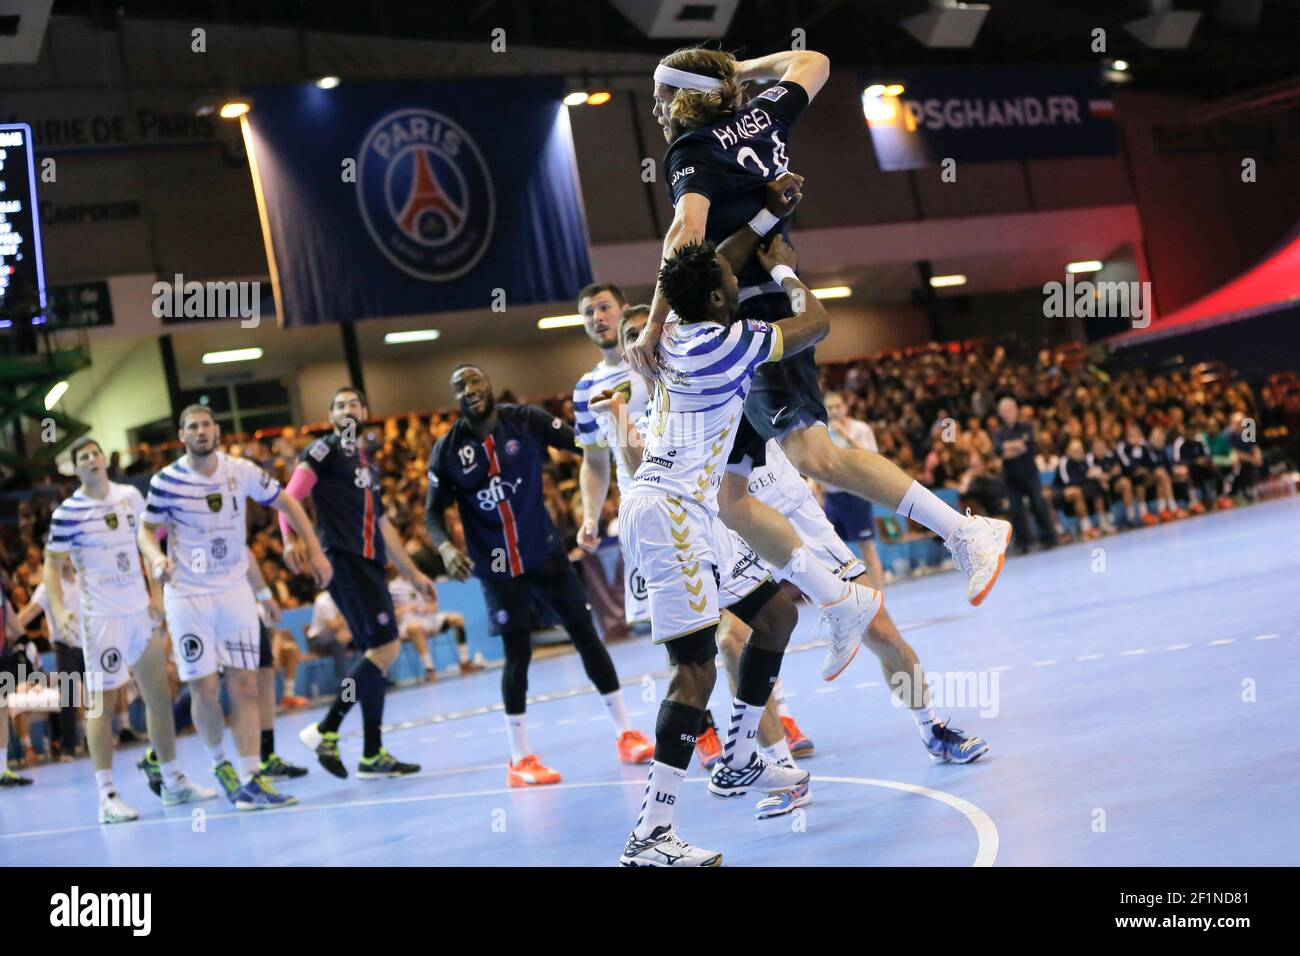 Mikkel Hansen (PSG) during the French Championship D1 Handball match  between Paris Saint Germain (PSG) and Dunkerque, on October 22, 2015 at  halle Carpentier in Paris, France. Photo Stephane Allaman / DPPI